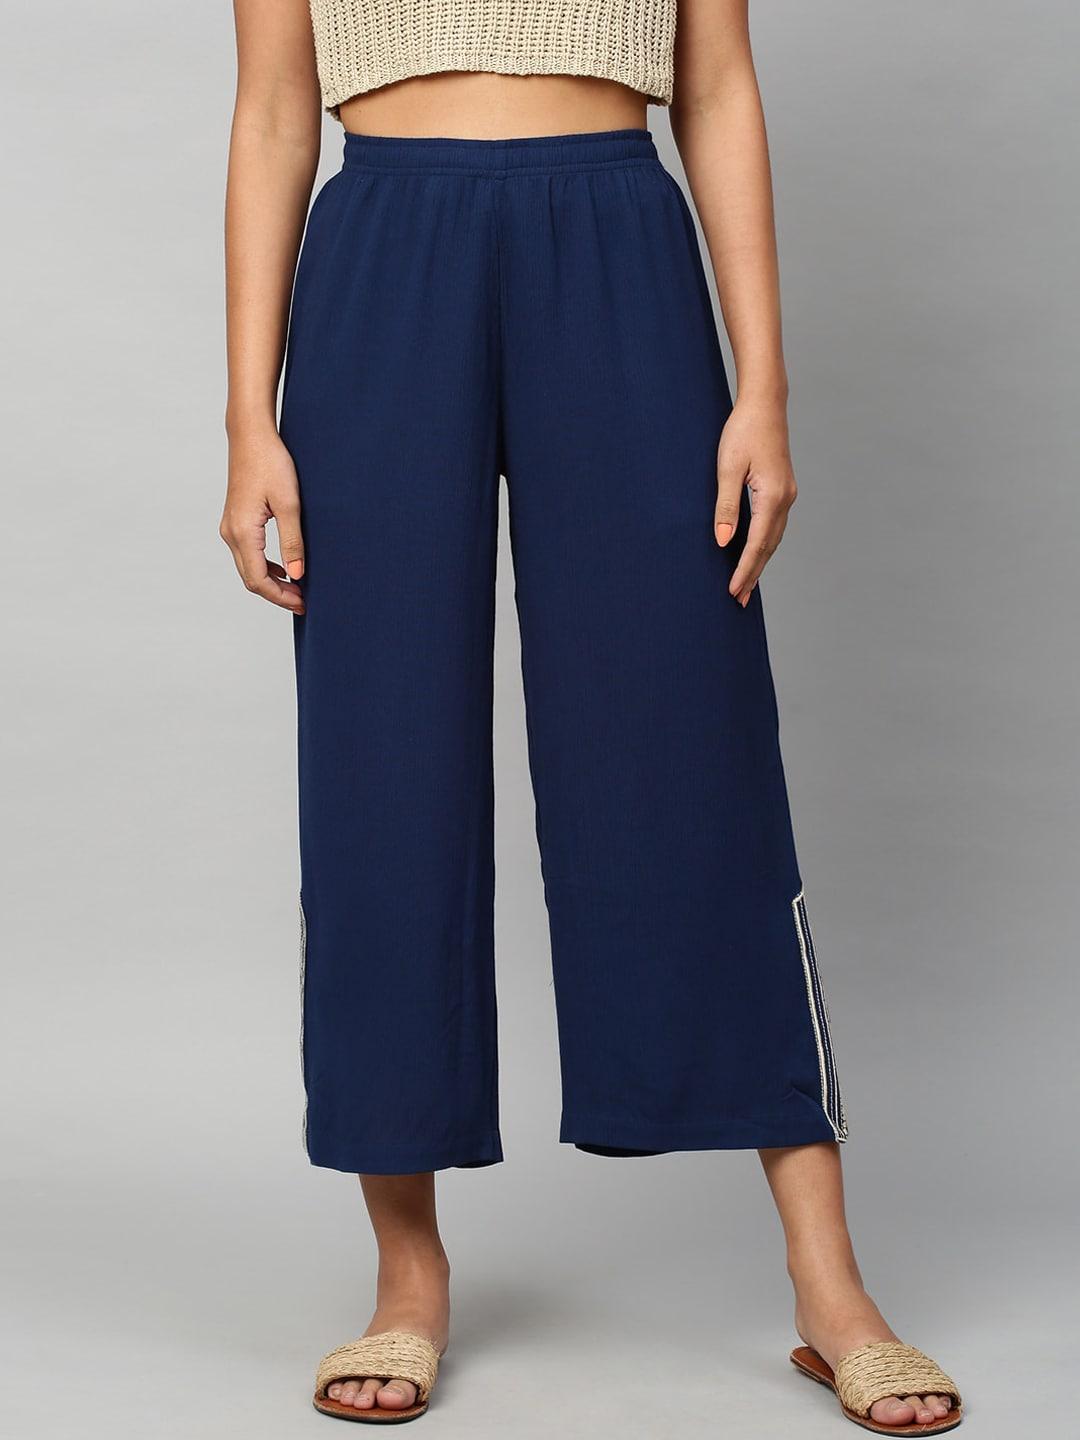 chemistry women navy blue regular fit cropped culottes